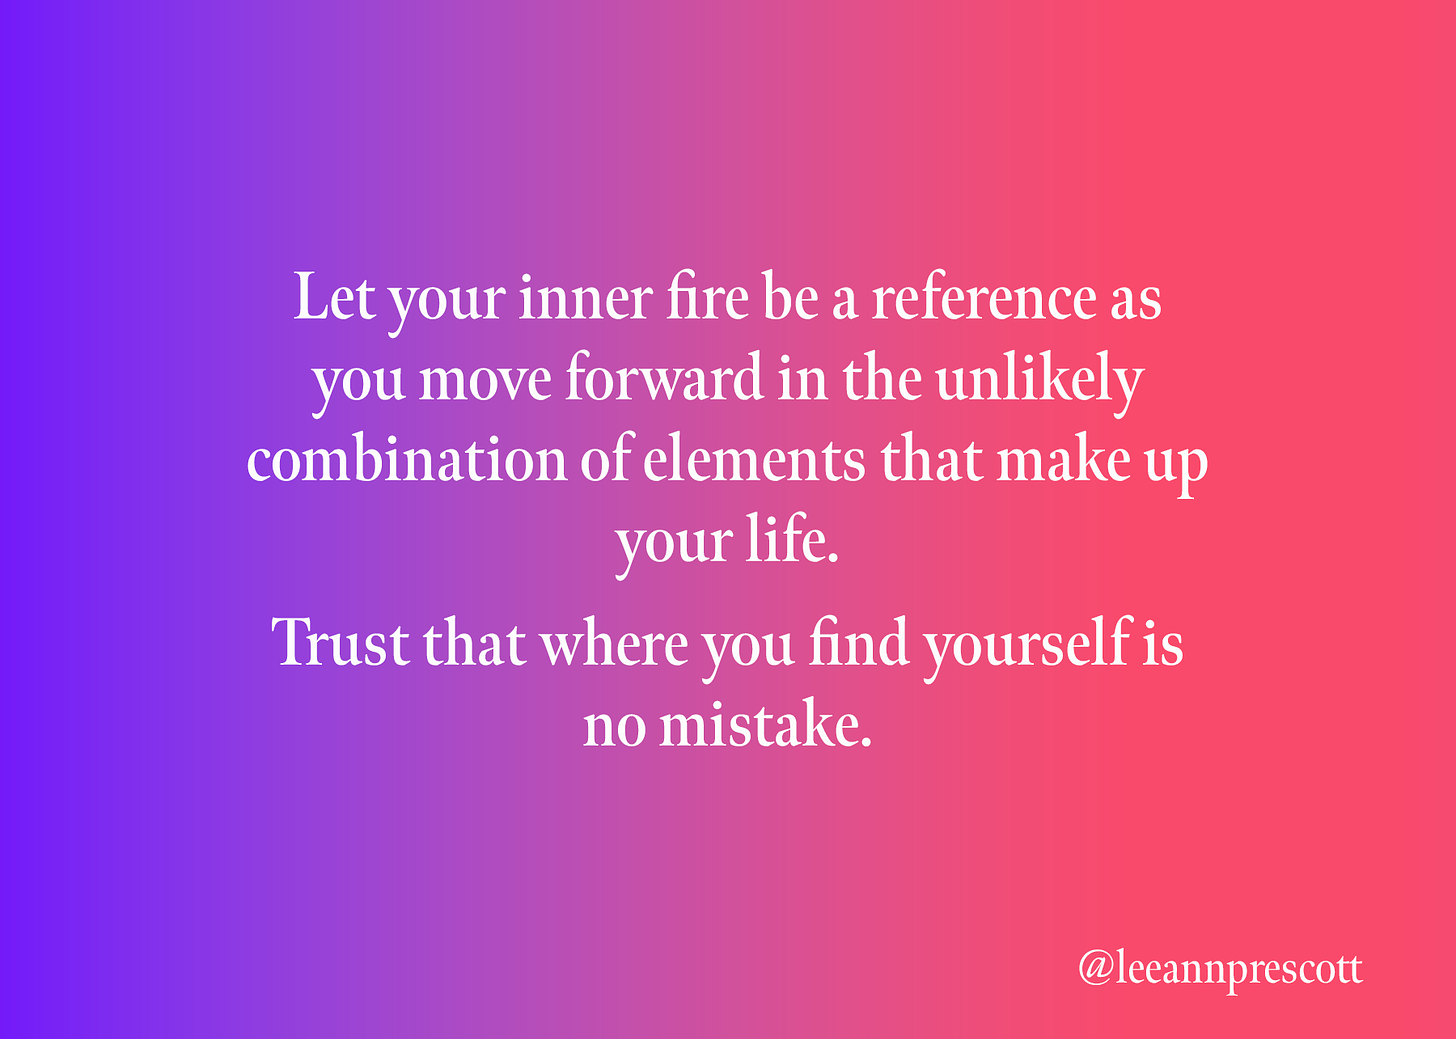 trust that where you find yourself is no mistake